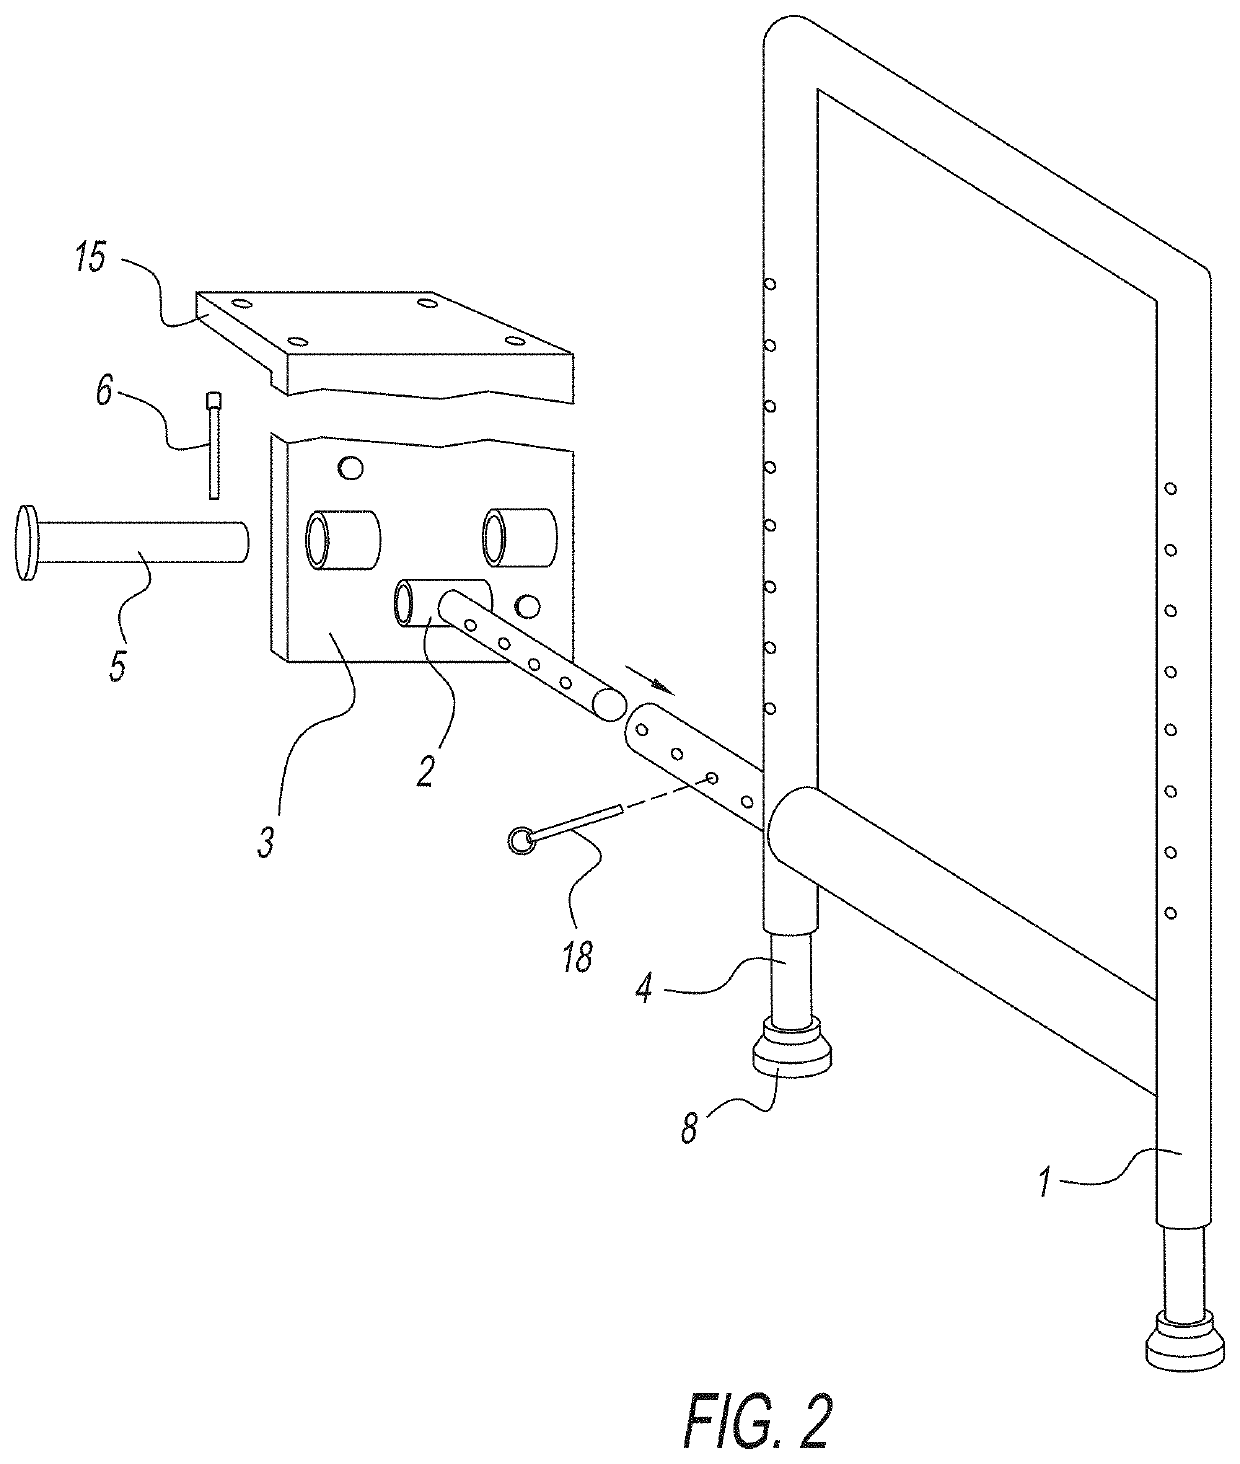 Watercraft stabilizing device for personnel boarding or exiting